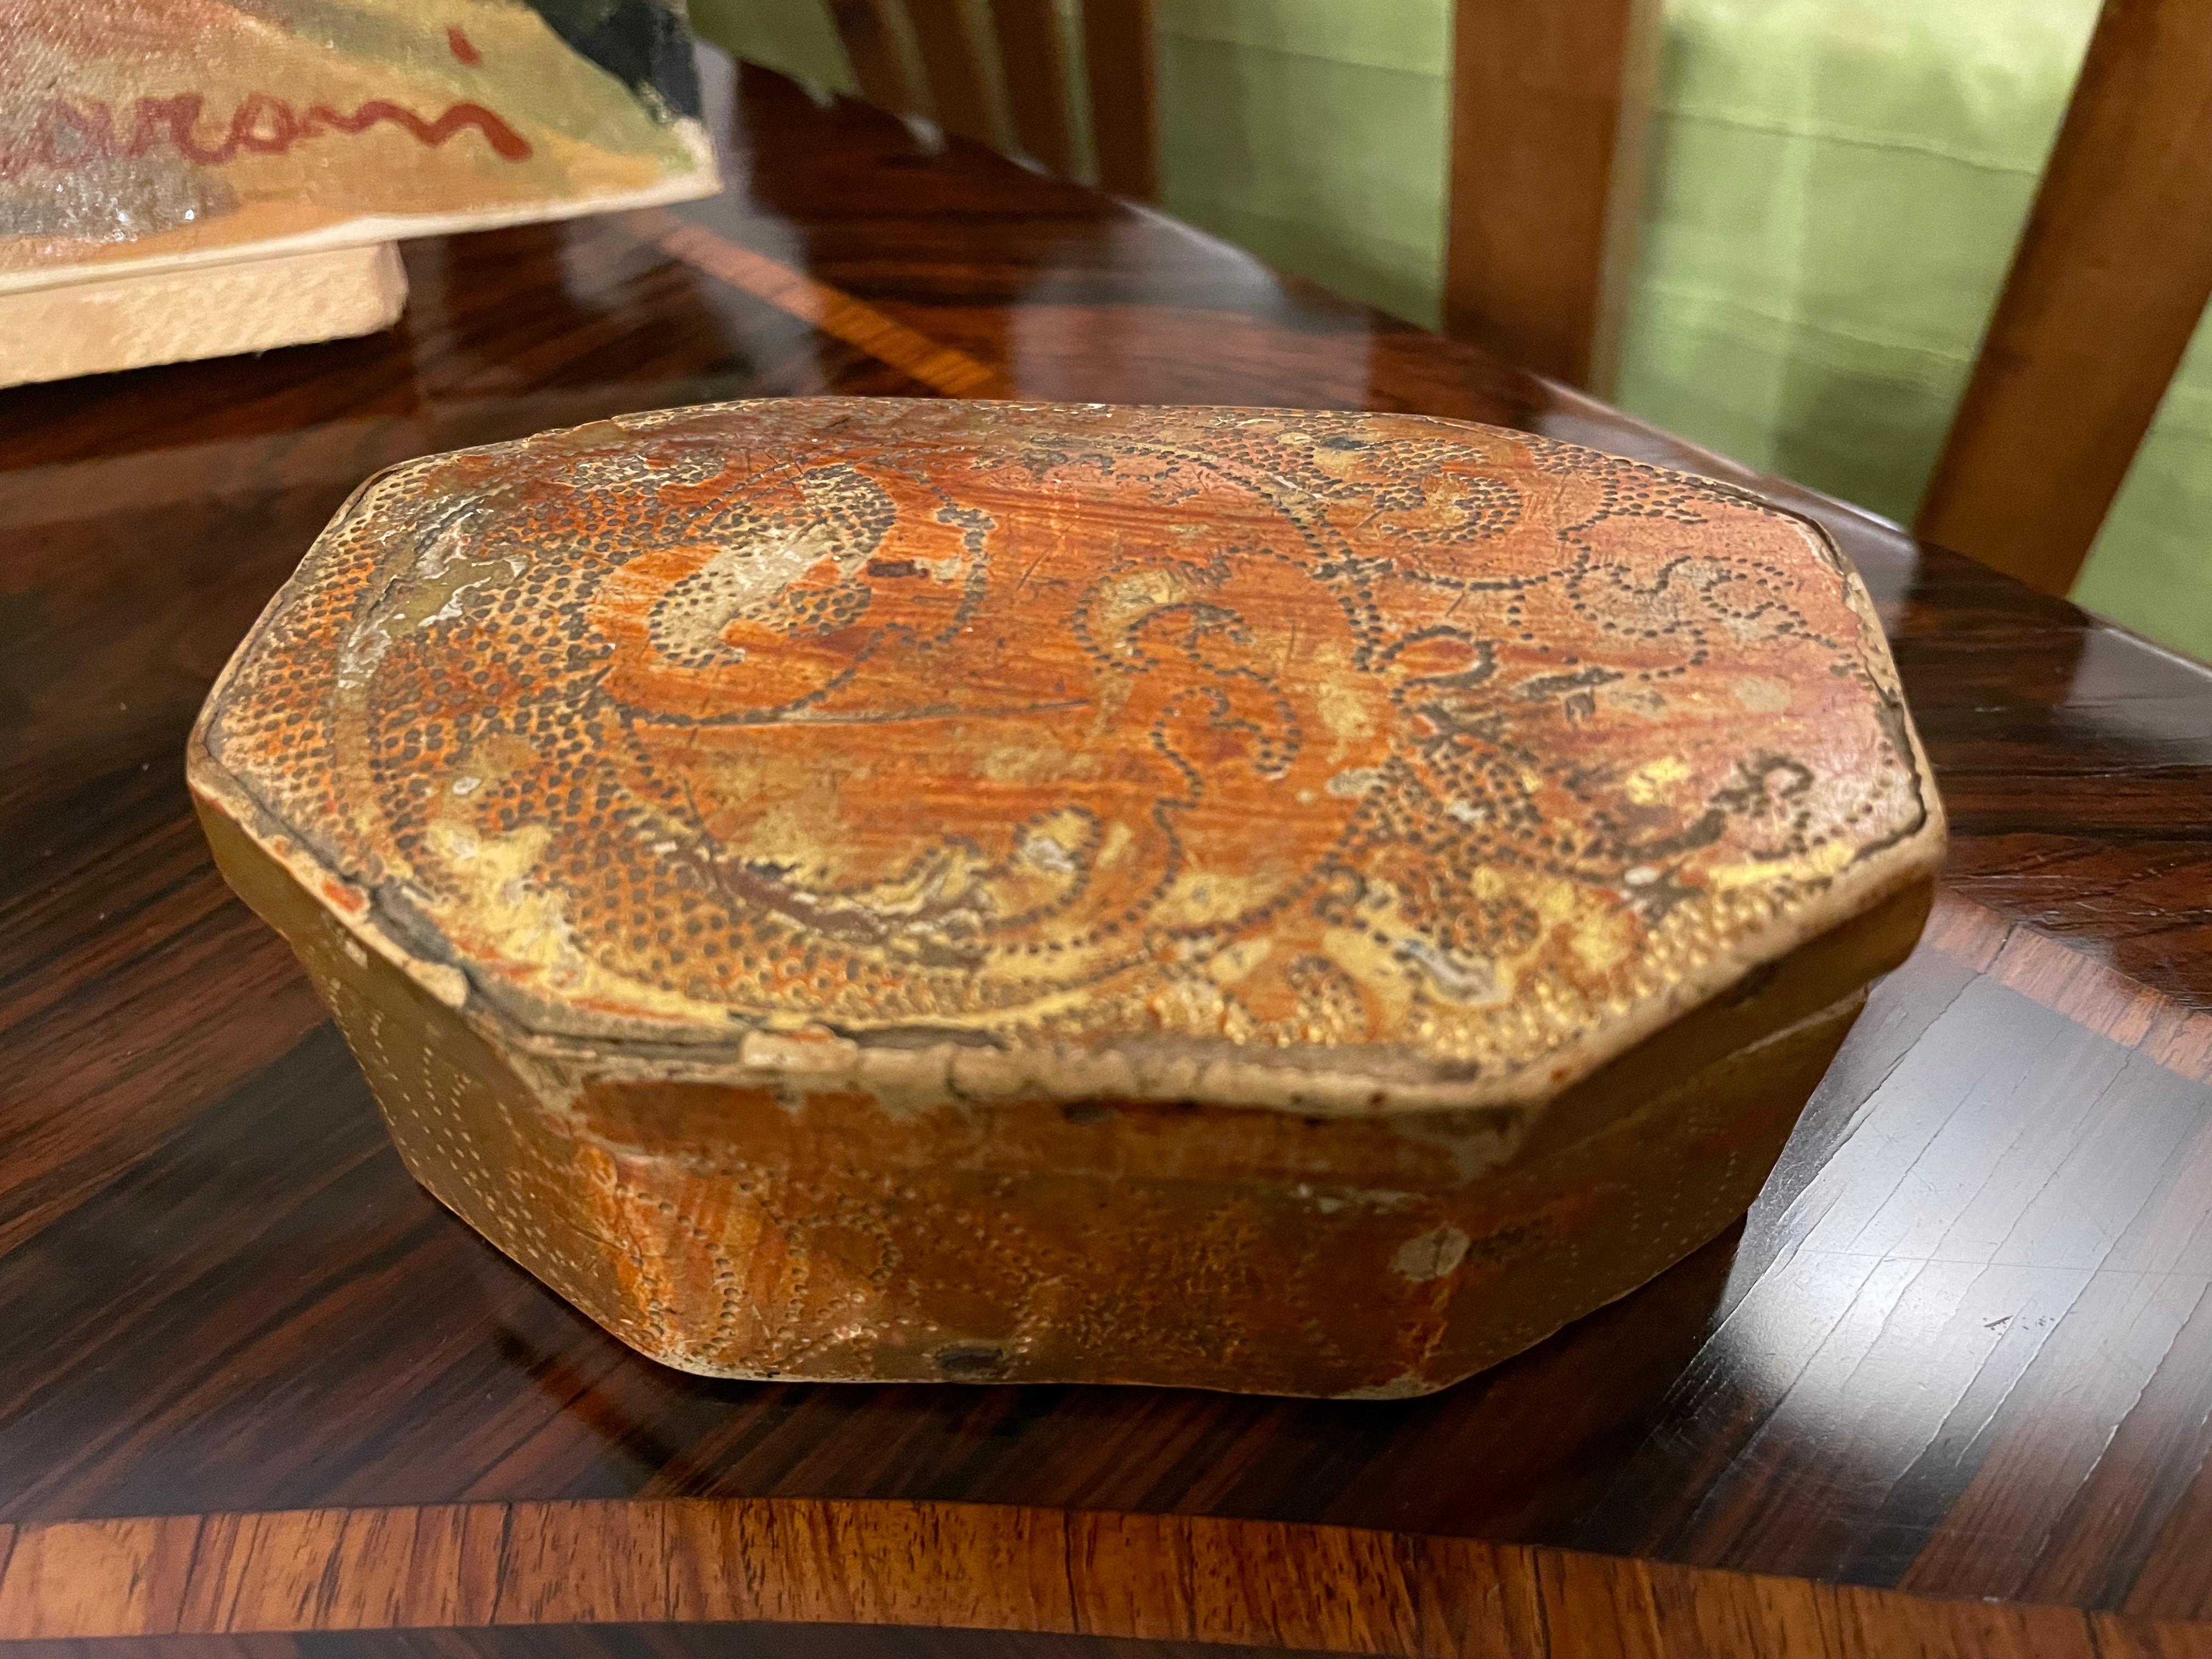 Italian antique gilded Florentine box, octagonal shape realized in white walnut, engraved on each side and the top and with bulin scrolling decoration. The box dates back to the last quarter of 18th century, is in fair condition, with wear